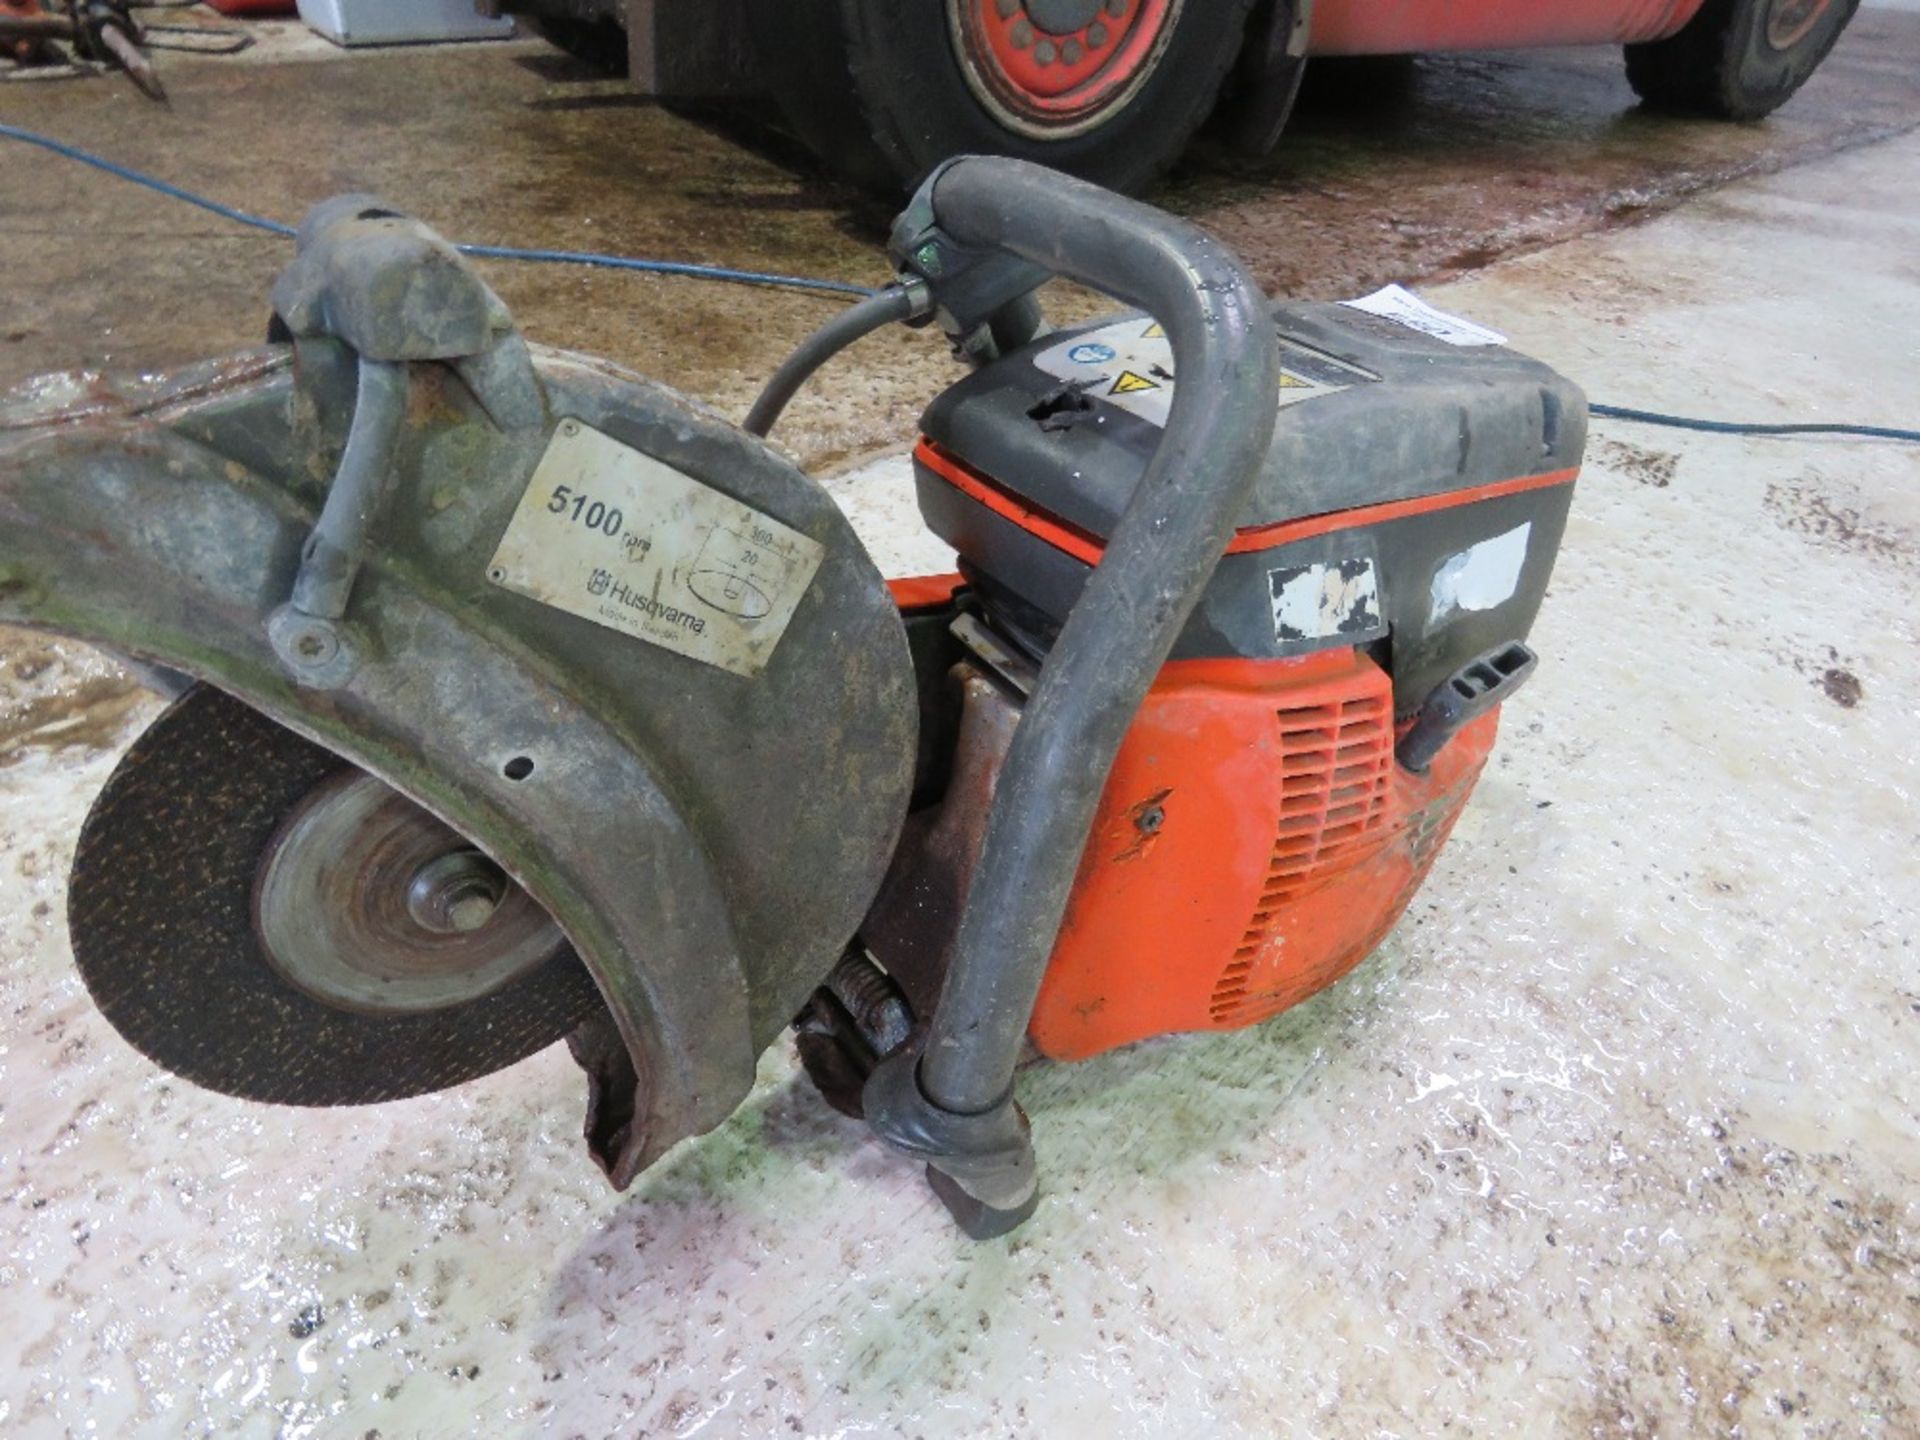 HUSQVARNA PETROL ENGINED CUT OFF SAW....THIS LOT IS SOLD UNDER THE AUCTIONEERS MARGIN SCHEME, THEREF - Image 2 of 3